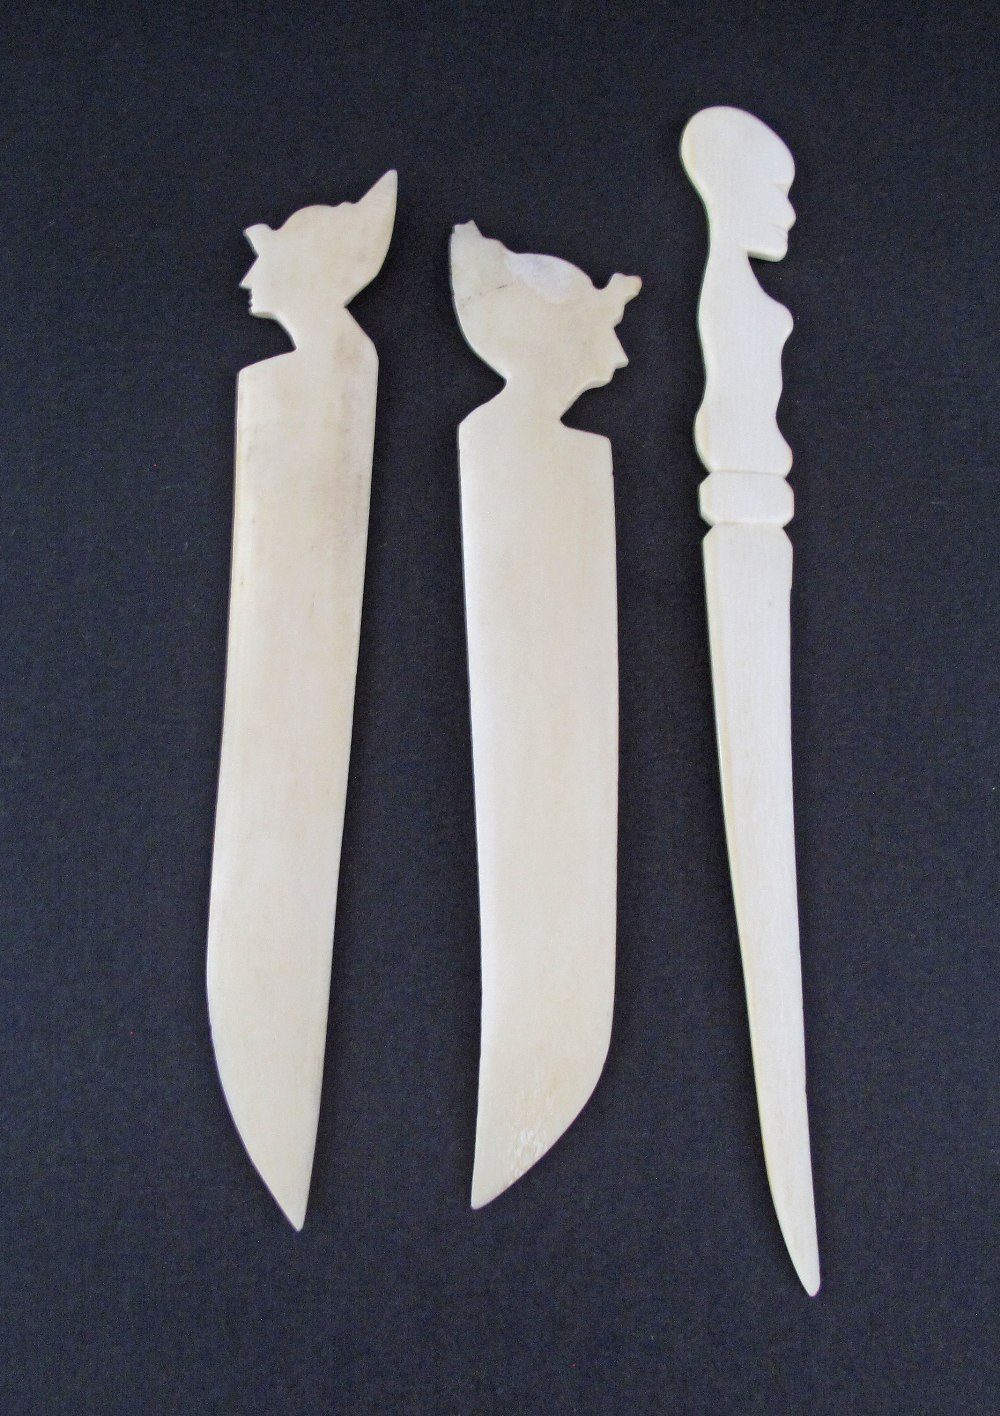 A collection of three African carved ivory paper knives, late 19th / early 20th century with - Image 2 of 3